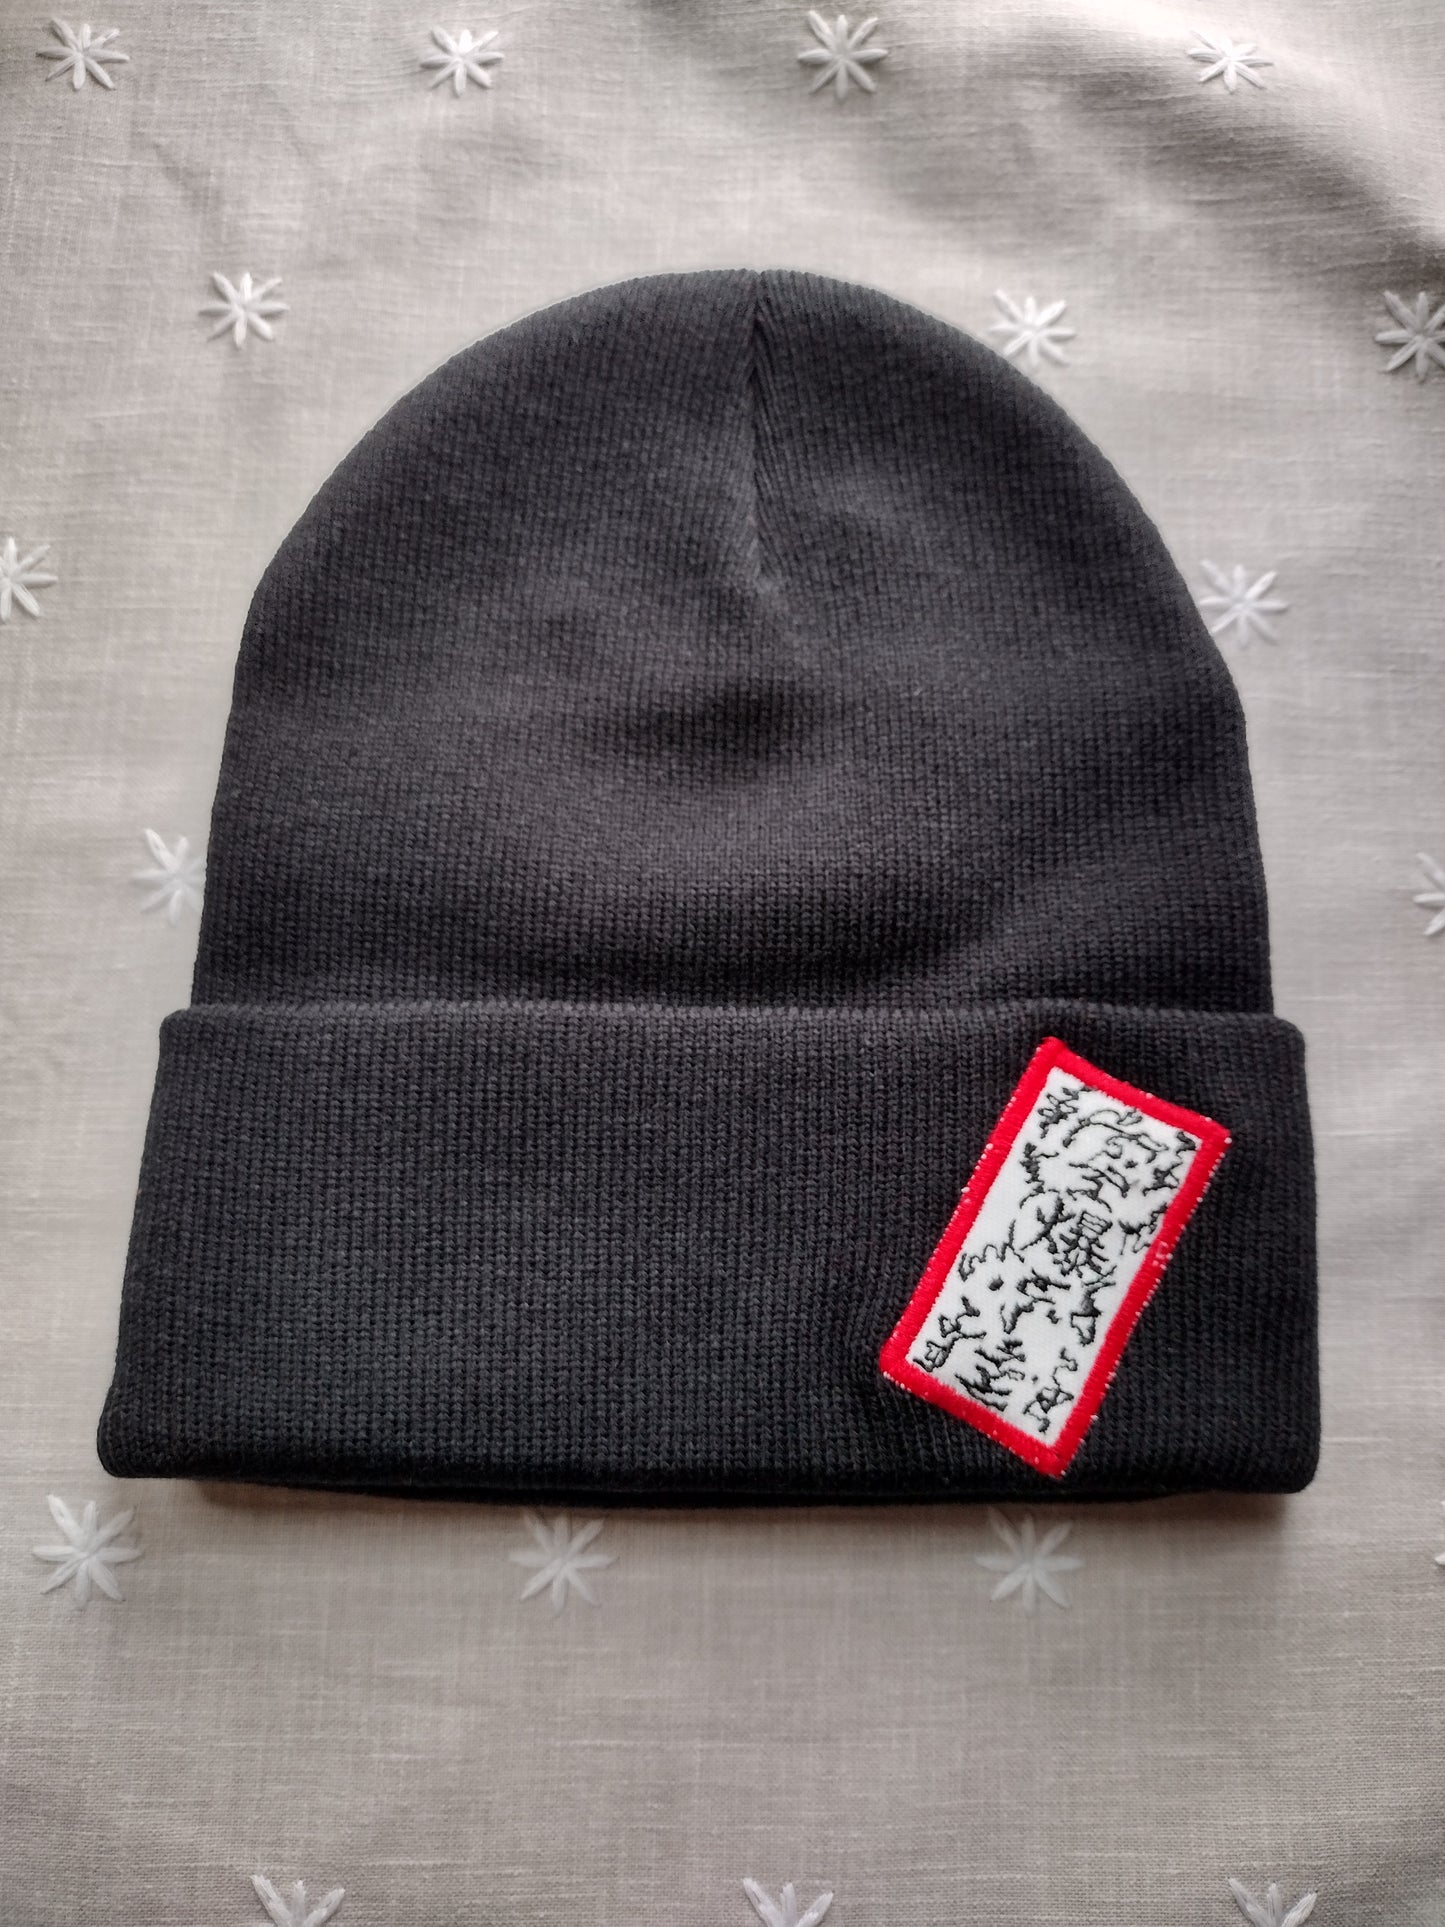 explosive seal embroidered hat